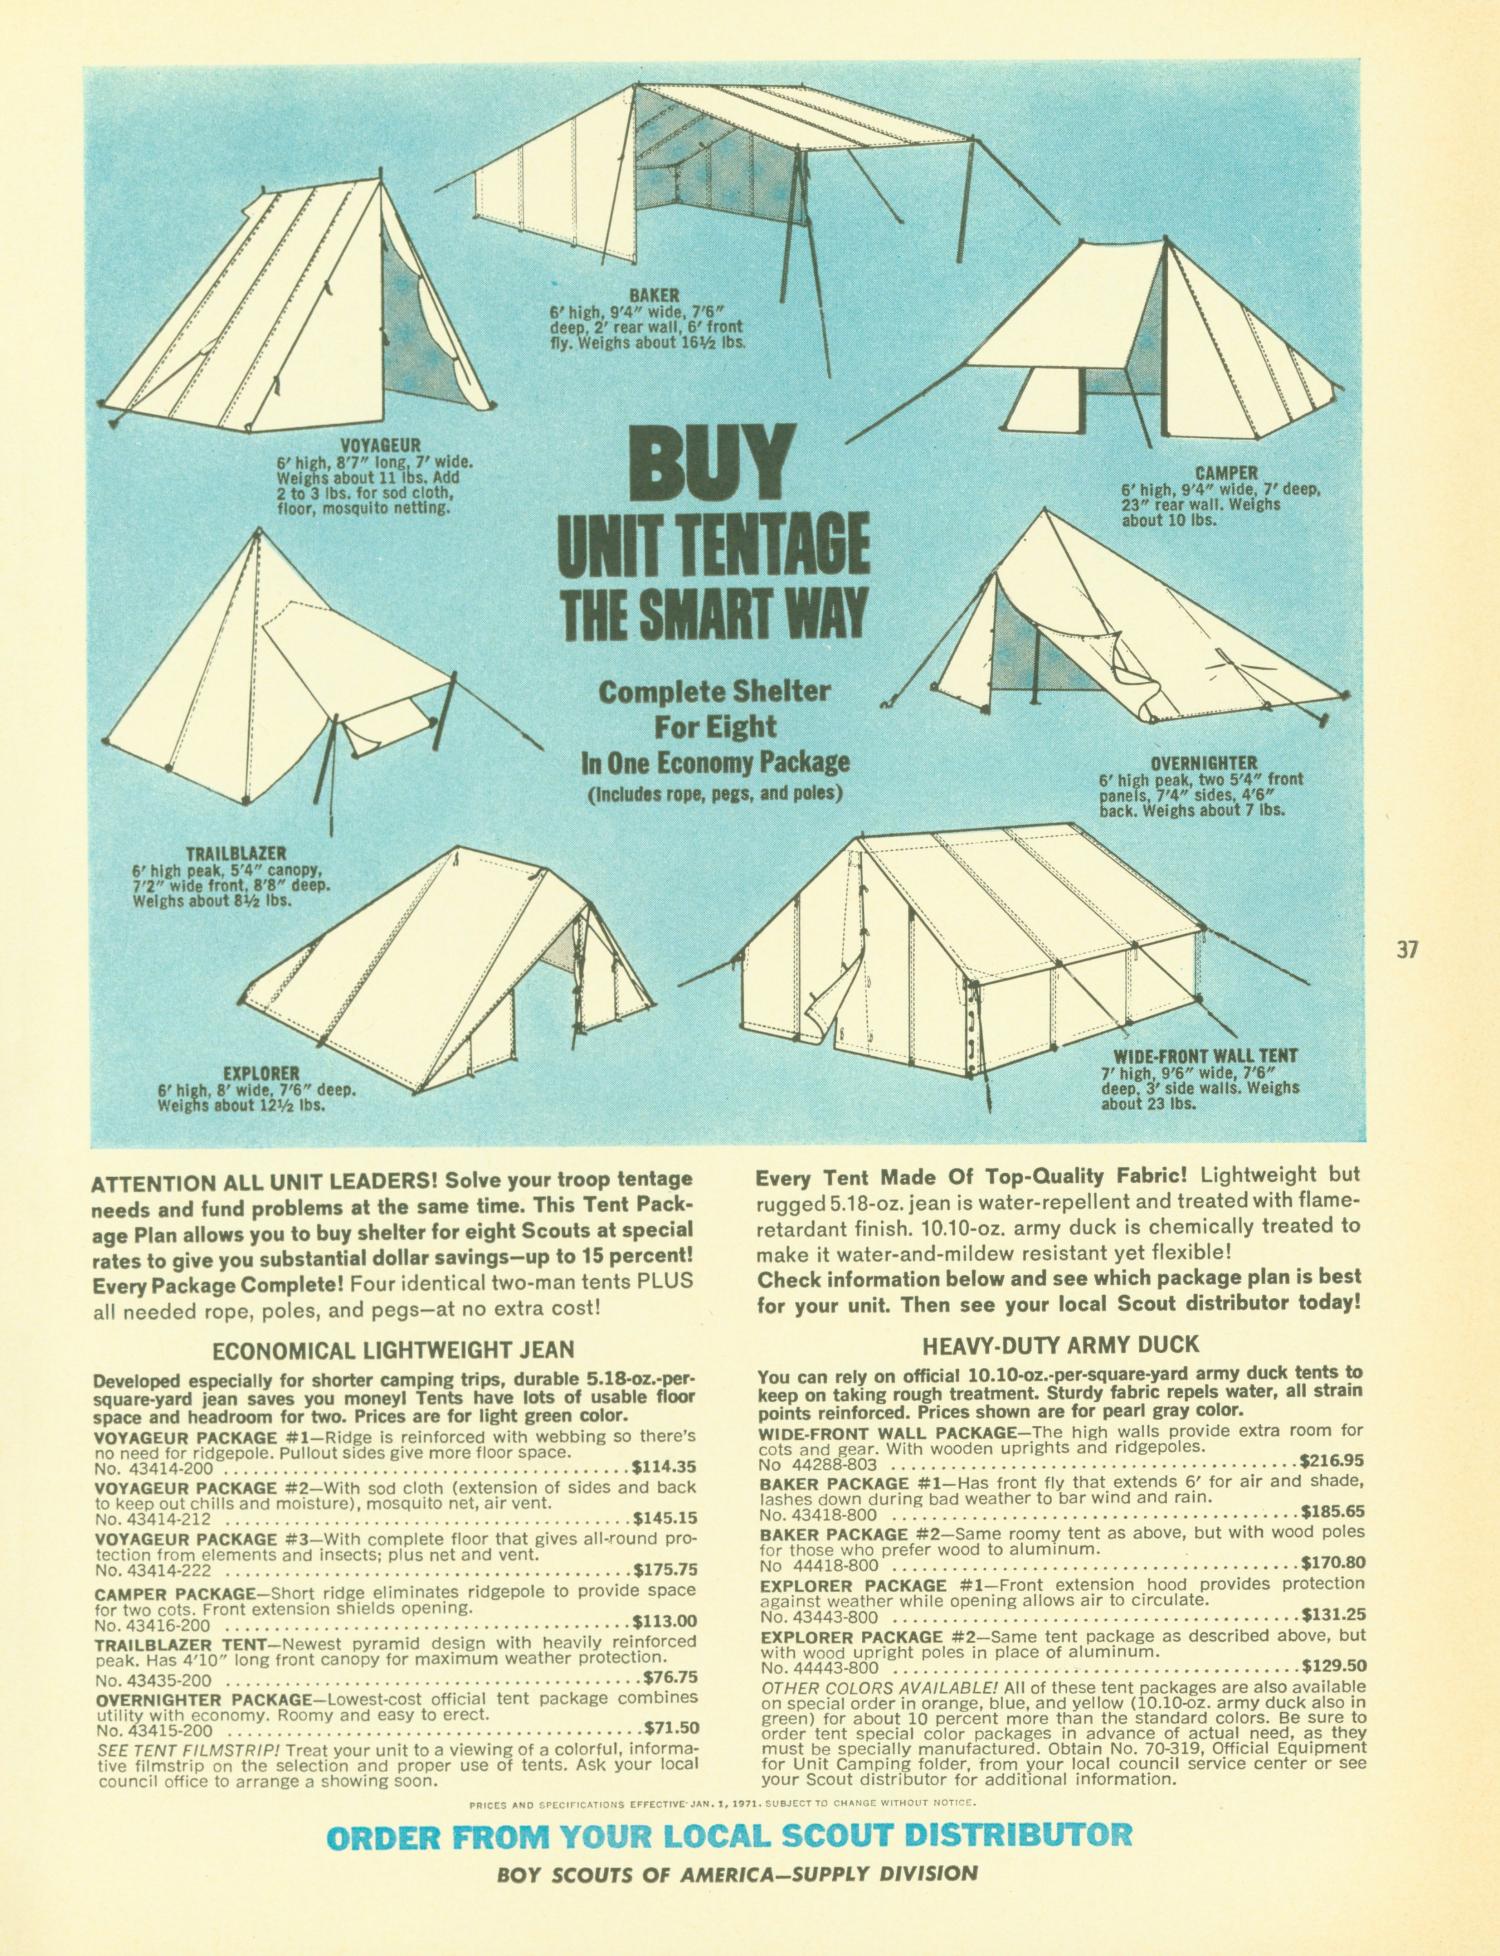 Scouting, Volume 59, Number 2, March-April 1971
                                                
                                                    37
                                                